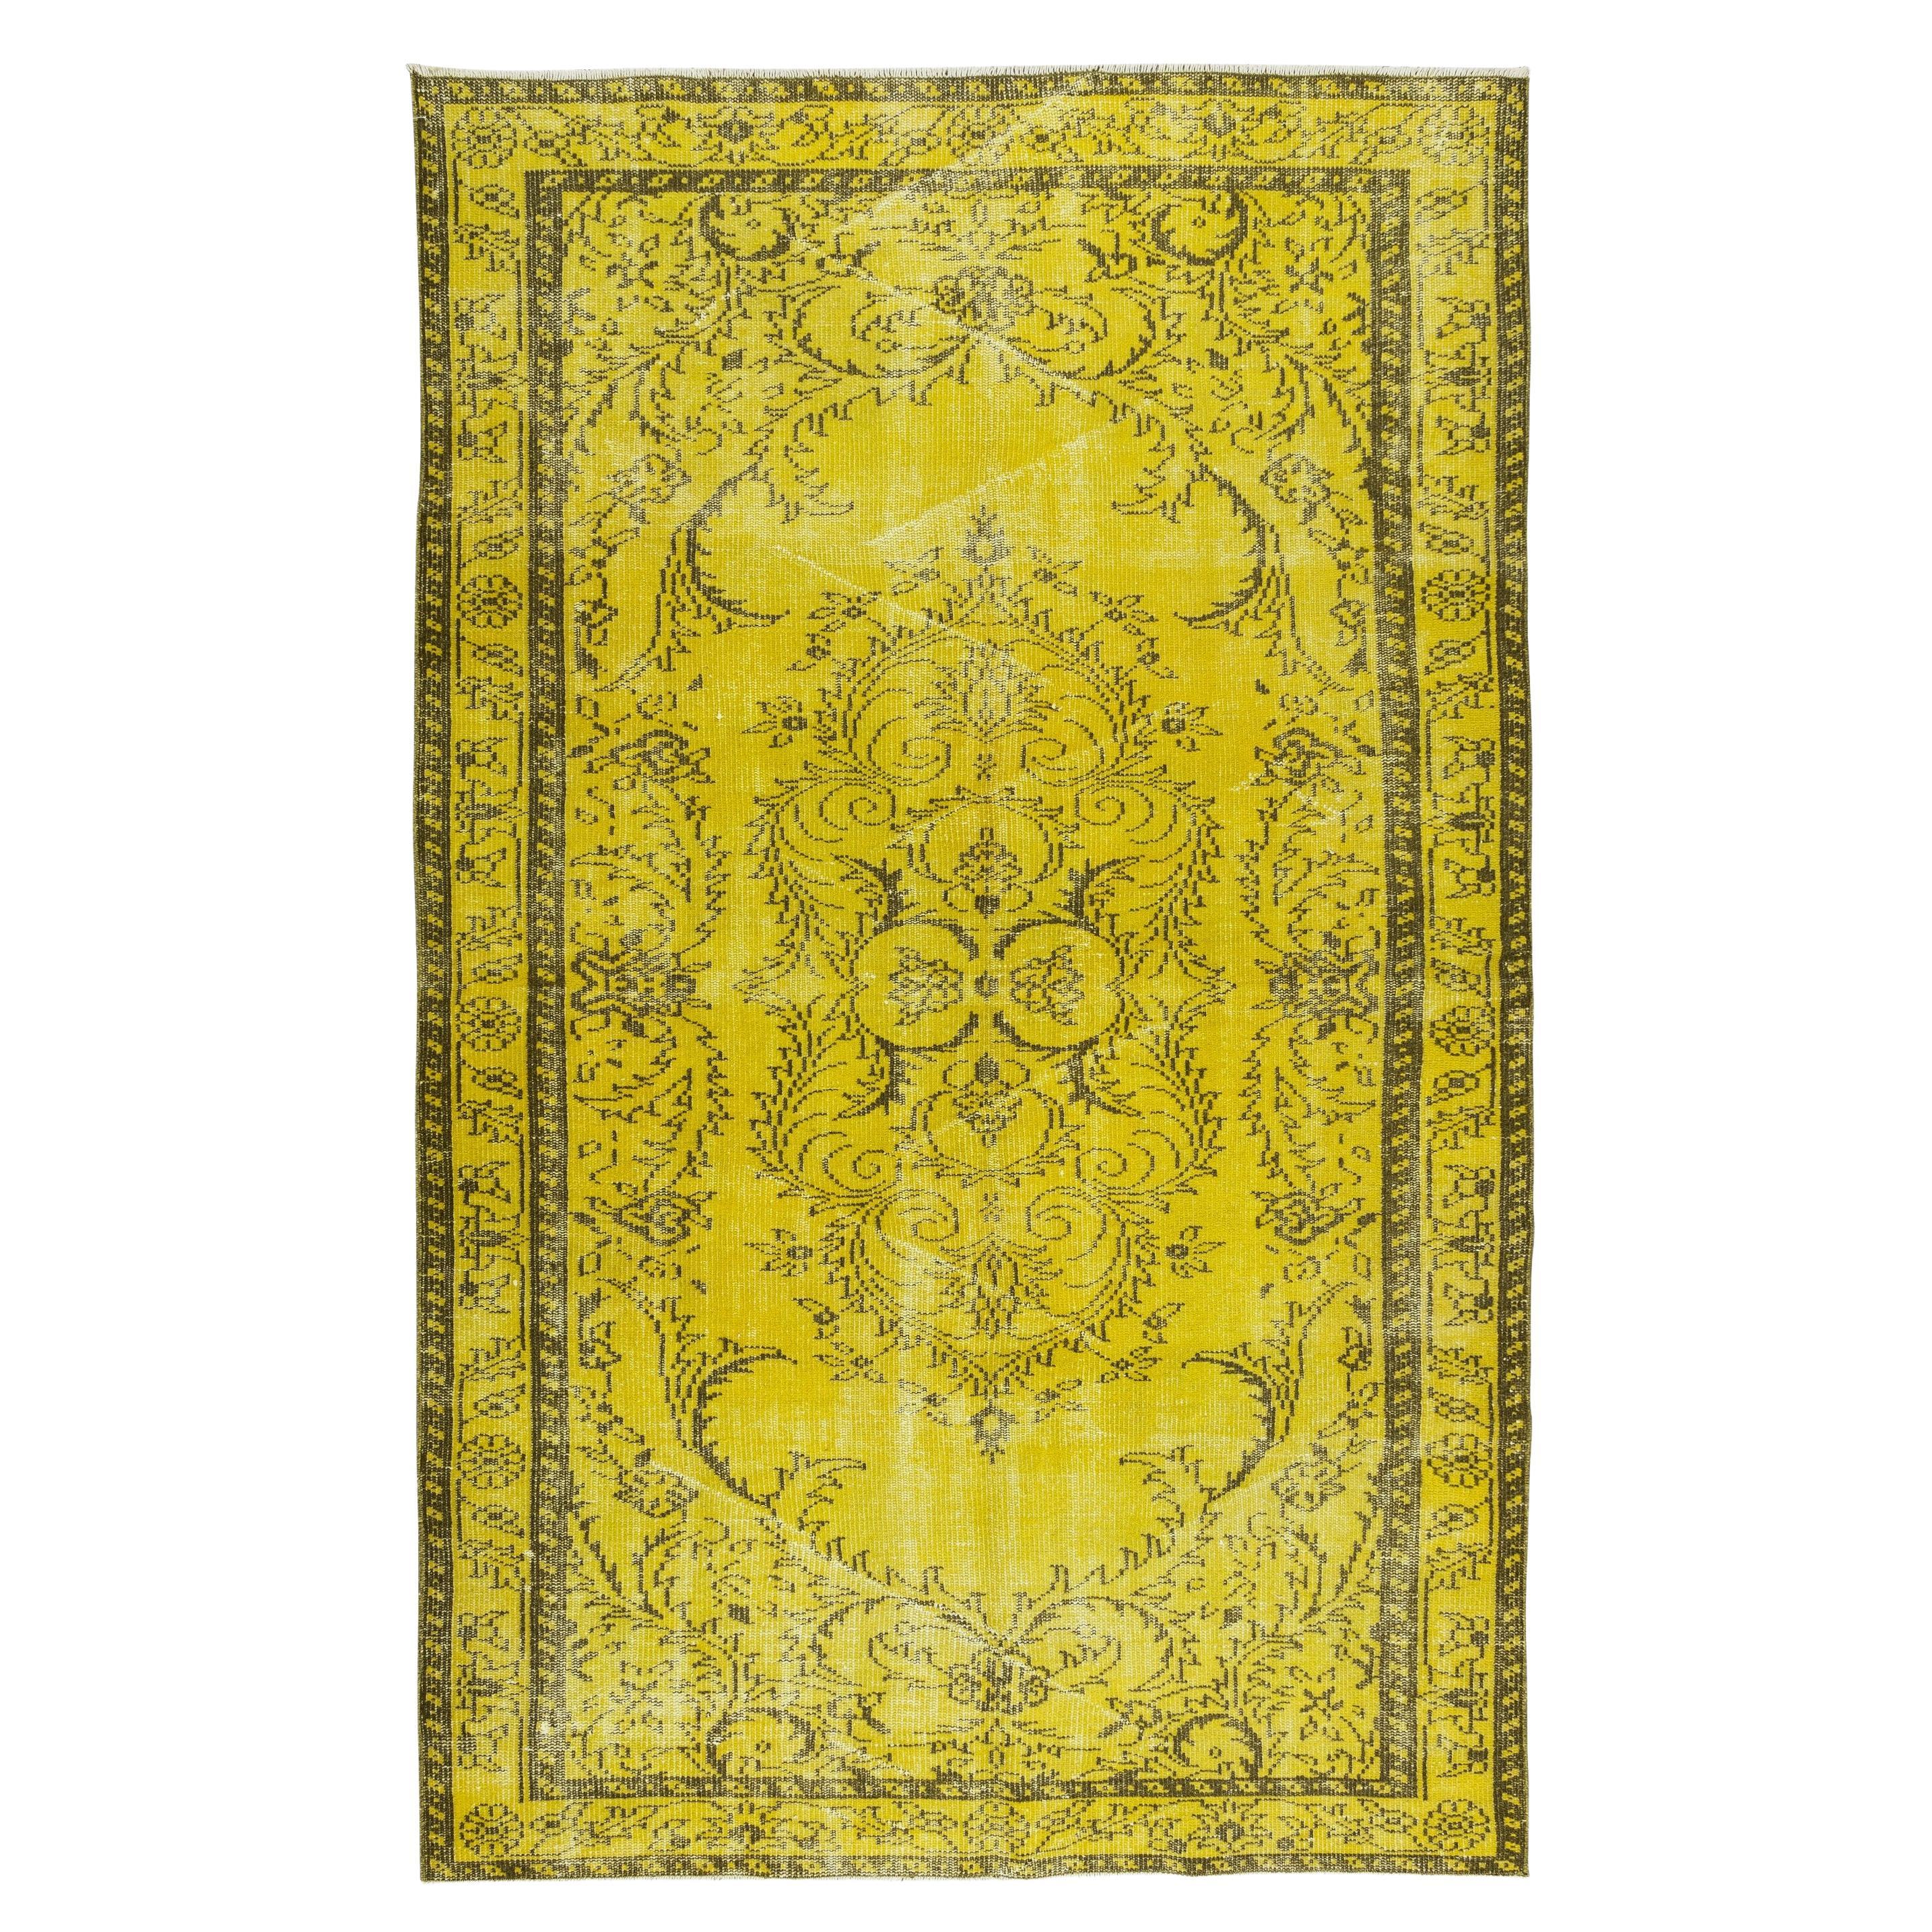 5.4x8.9 Ft Medallion Pattern Yellow Over-dyed Rug, 1960s Turkish Handmade Carpet For Sale